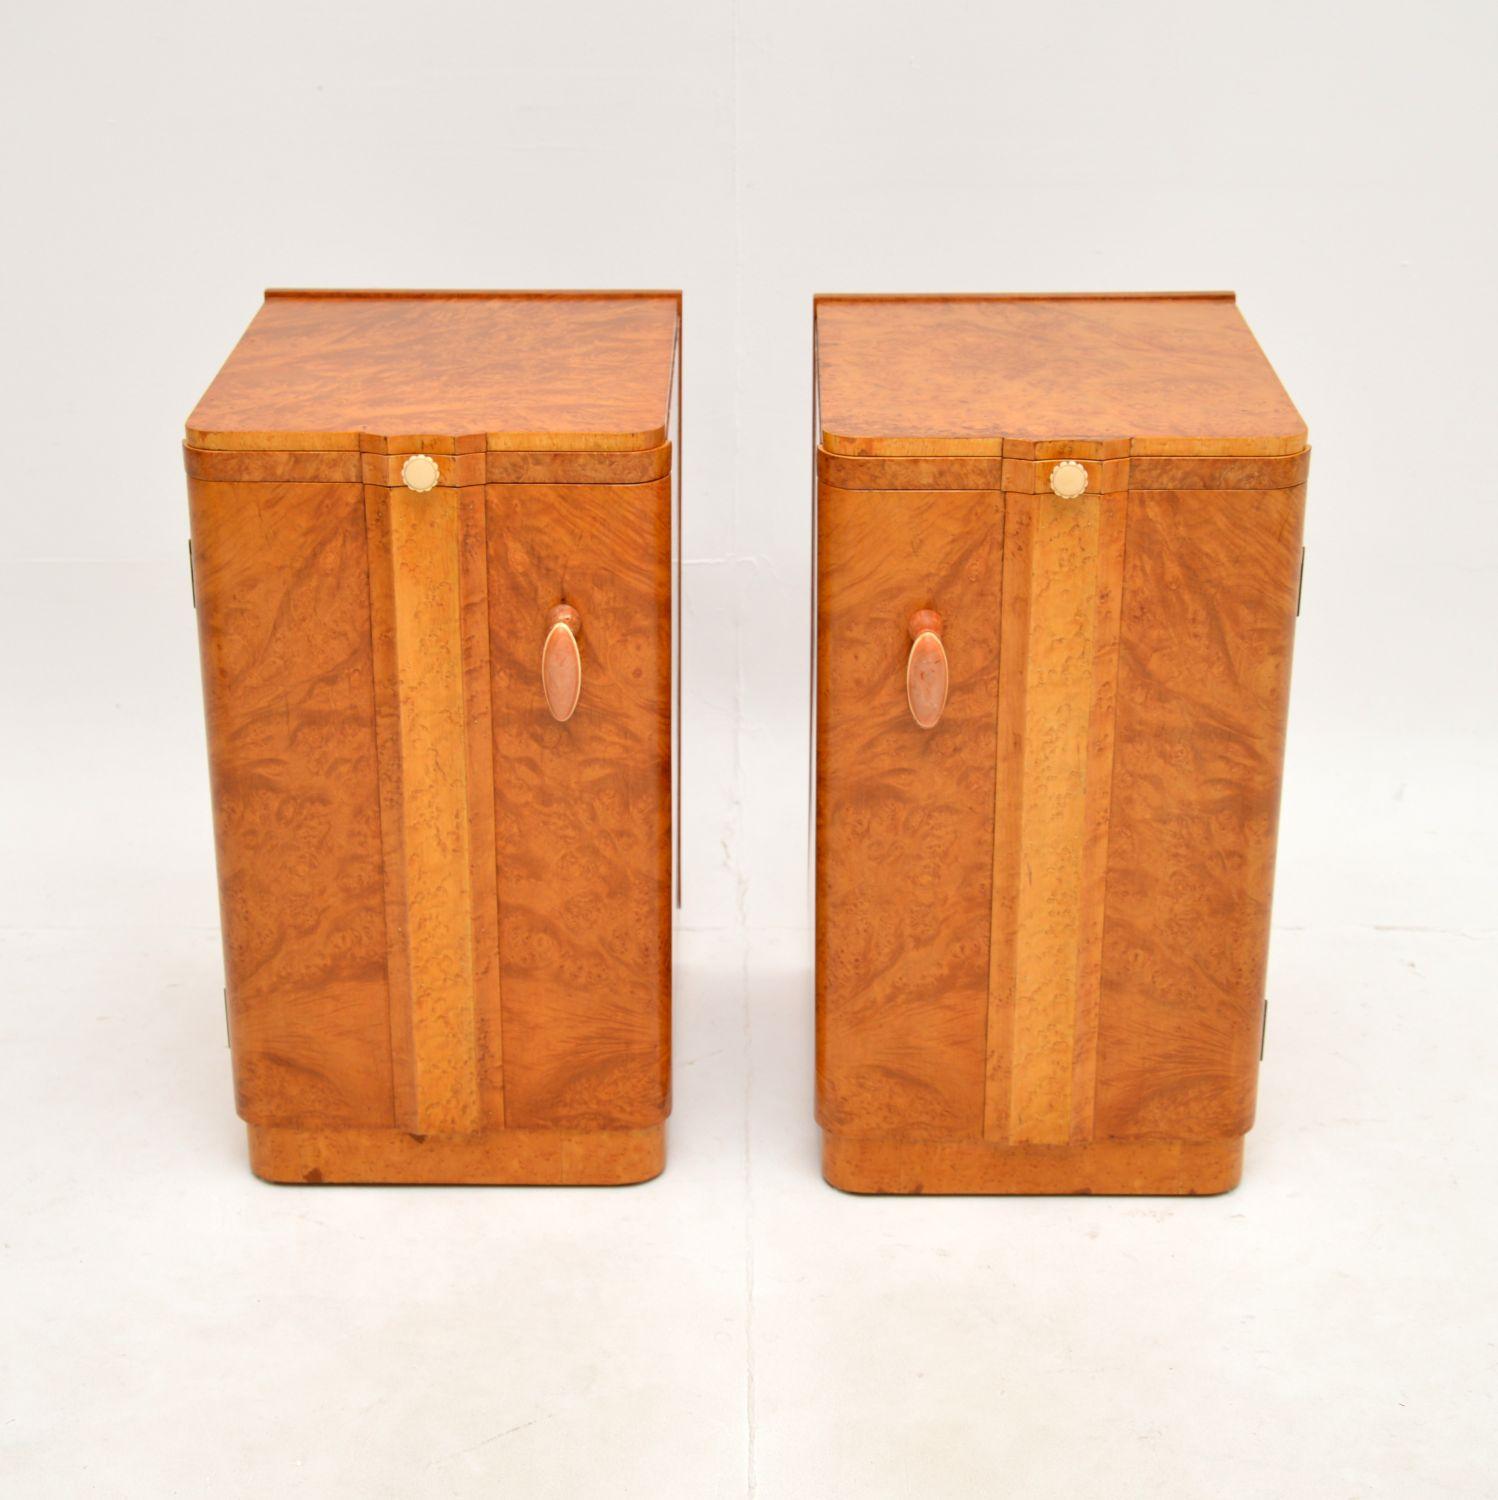 A stunning pair of Art Deco burr walnut bedside cabinets. They date from the 1920-30’s, they were made in England by Epstein.

The quality is outstanding, they are beautifully designed with lovely original bakelite handles. The fronts are nicely